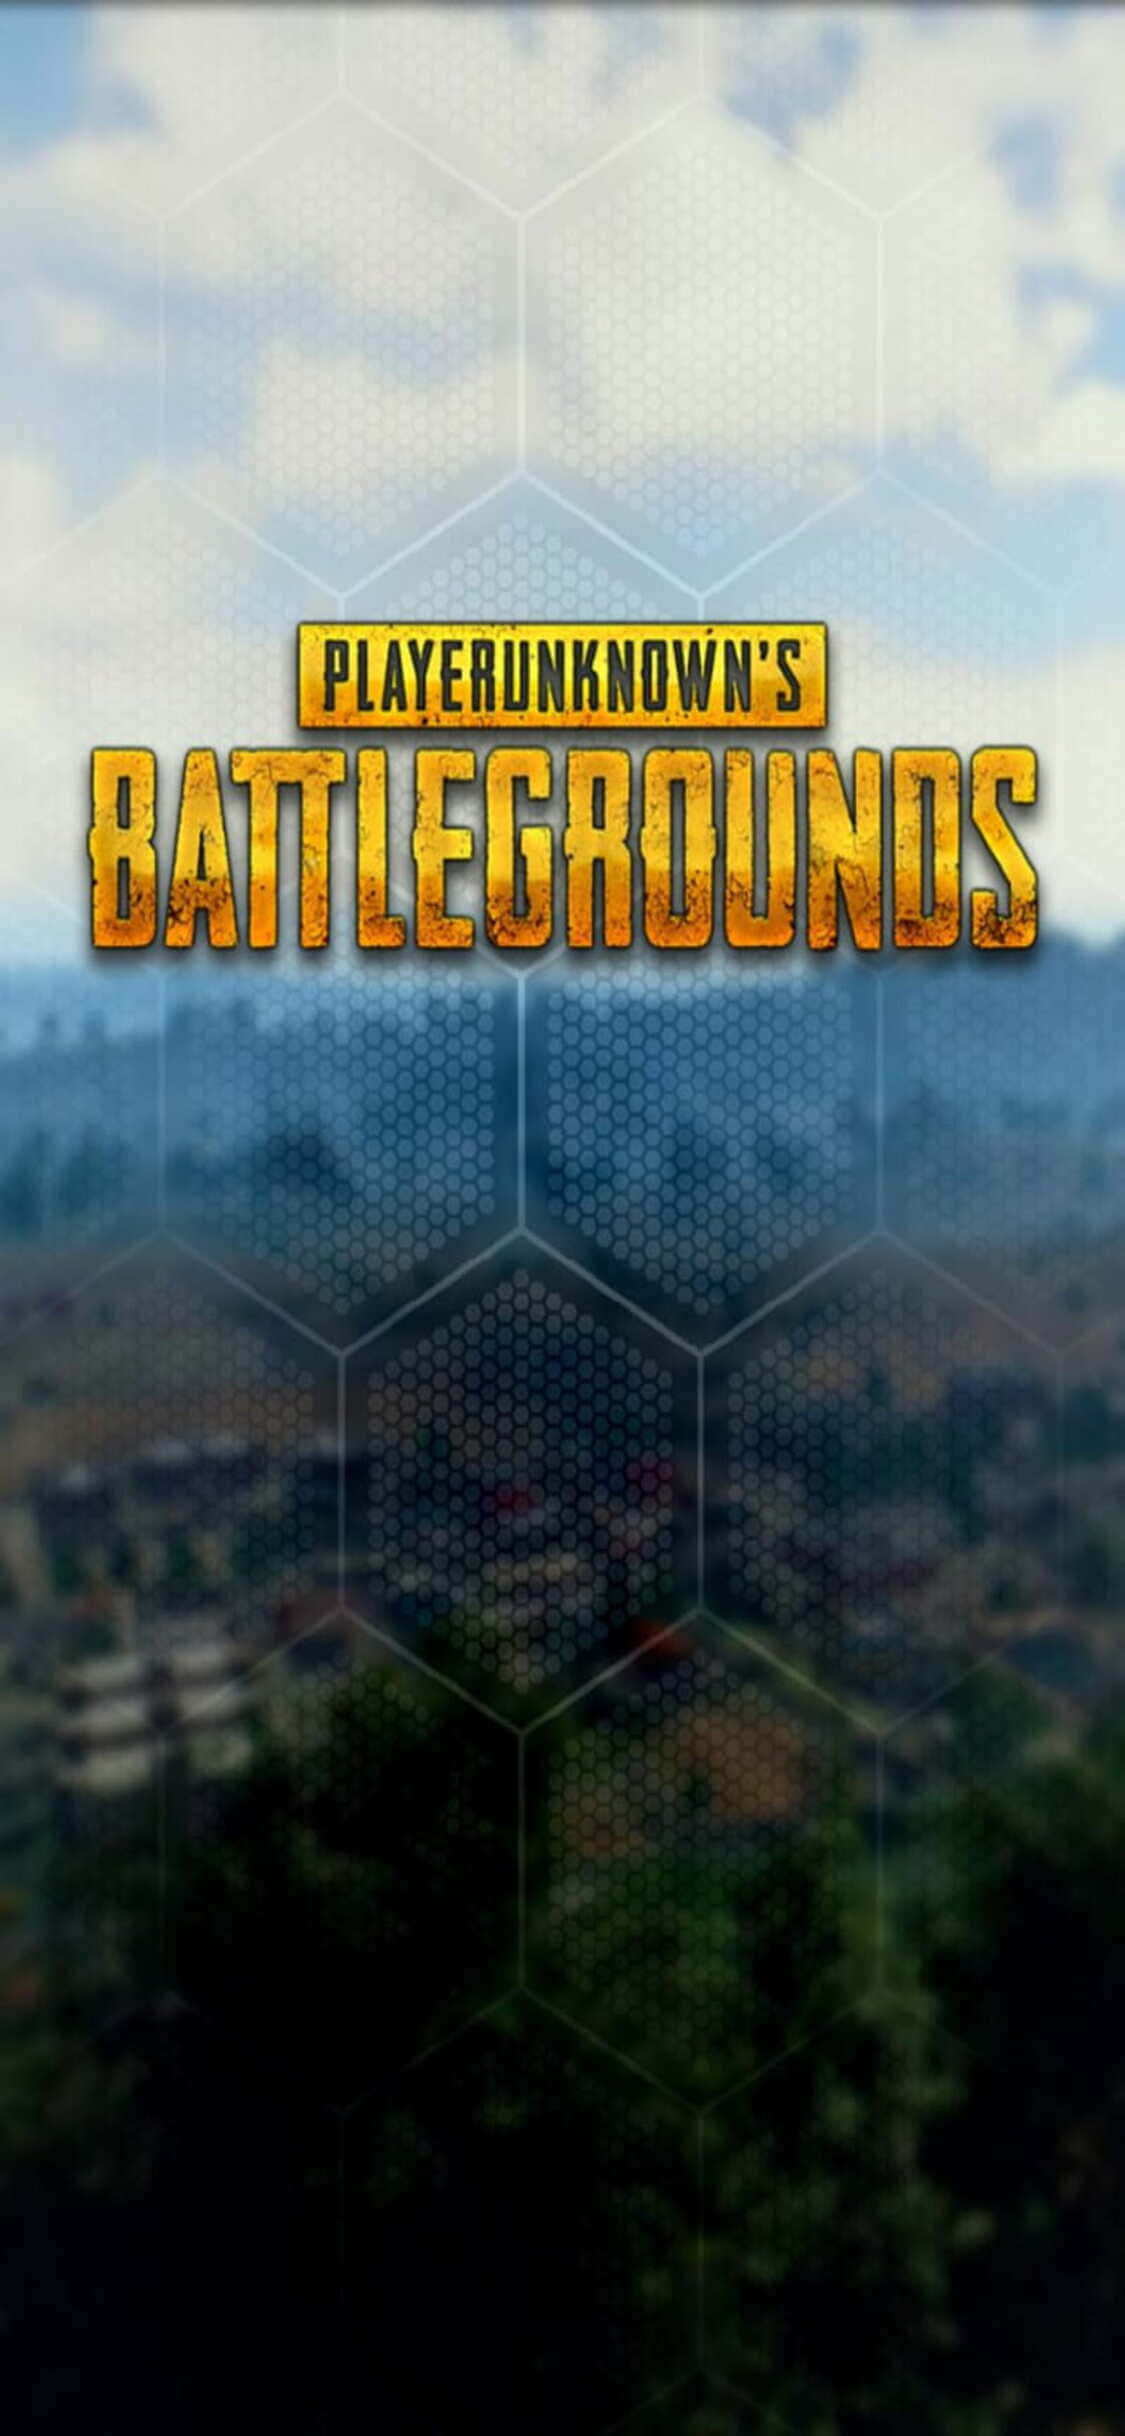 Pubg's Battlegrounds Logo With A City In The Background